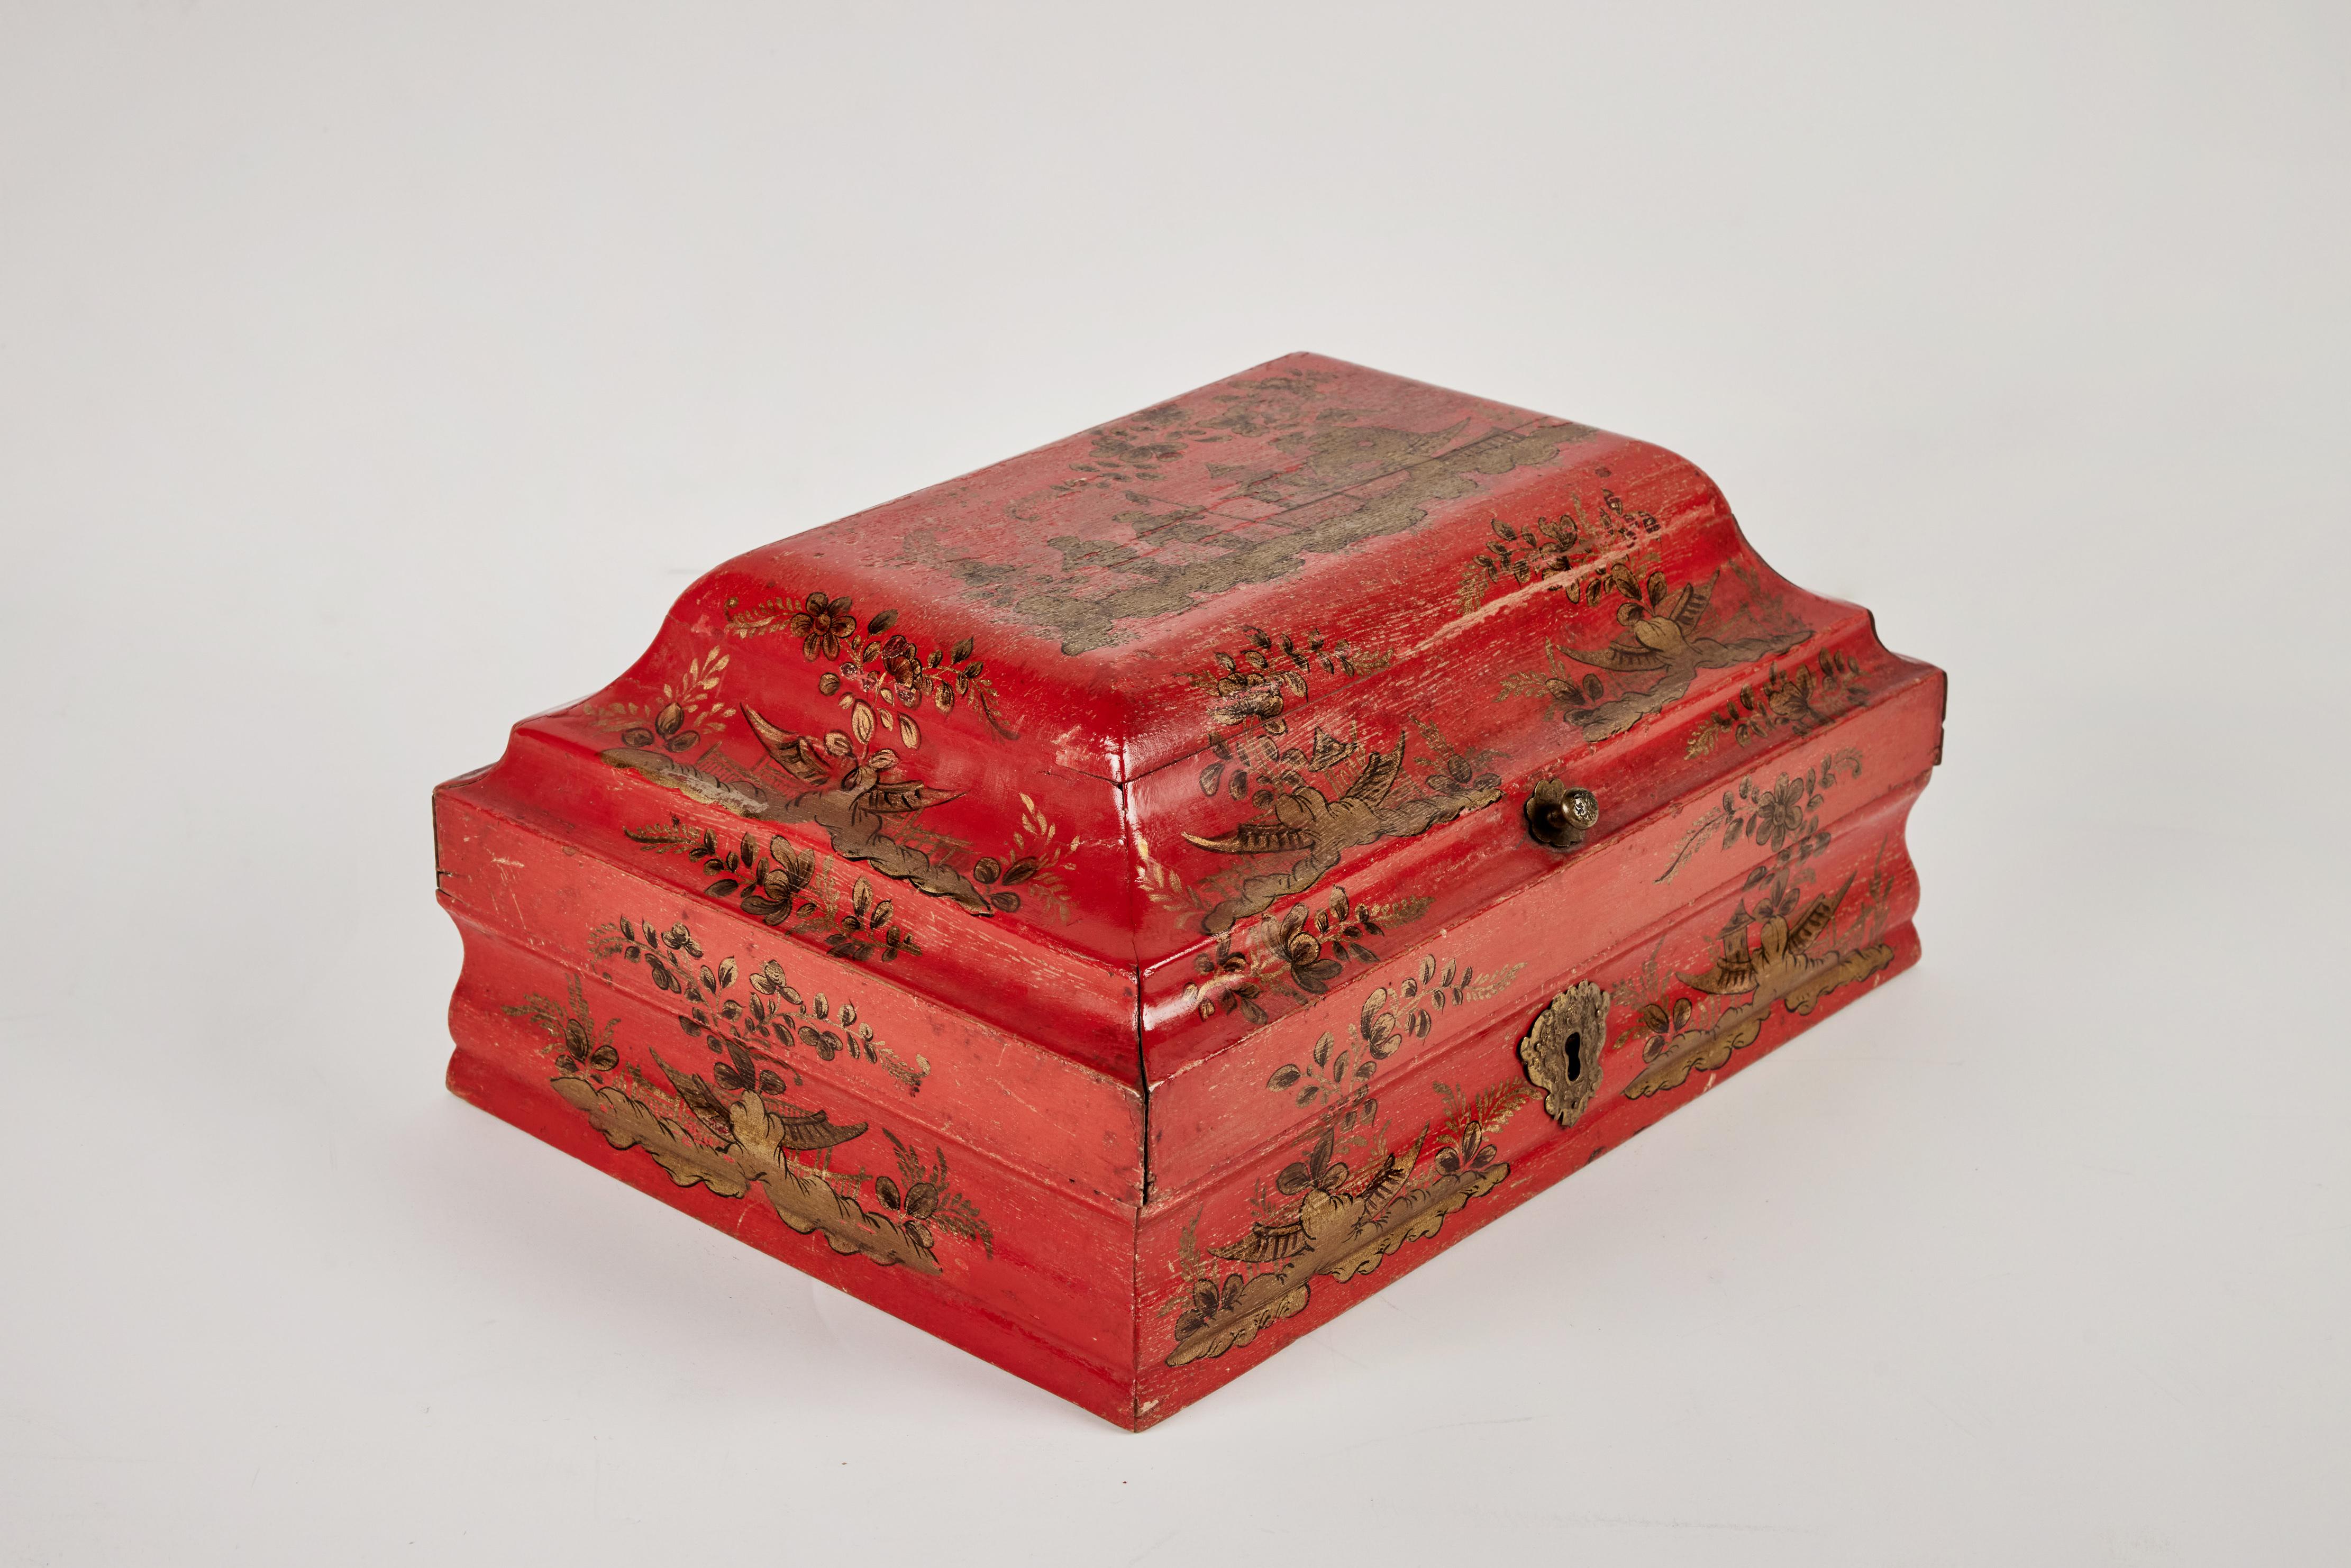 Hand painted, parcel gilt and lacquered, hinged wig box. Top design features 2 figures in a garden with a pagoda.  Original hardware.